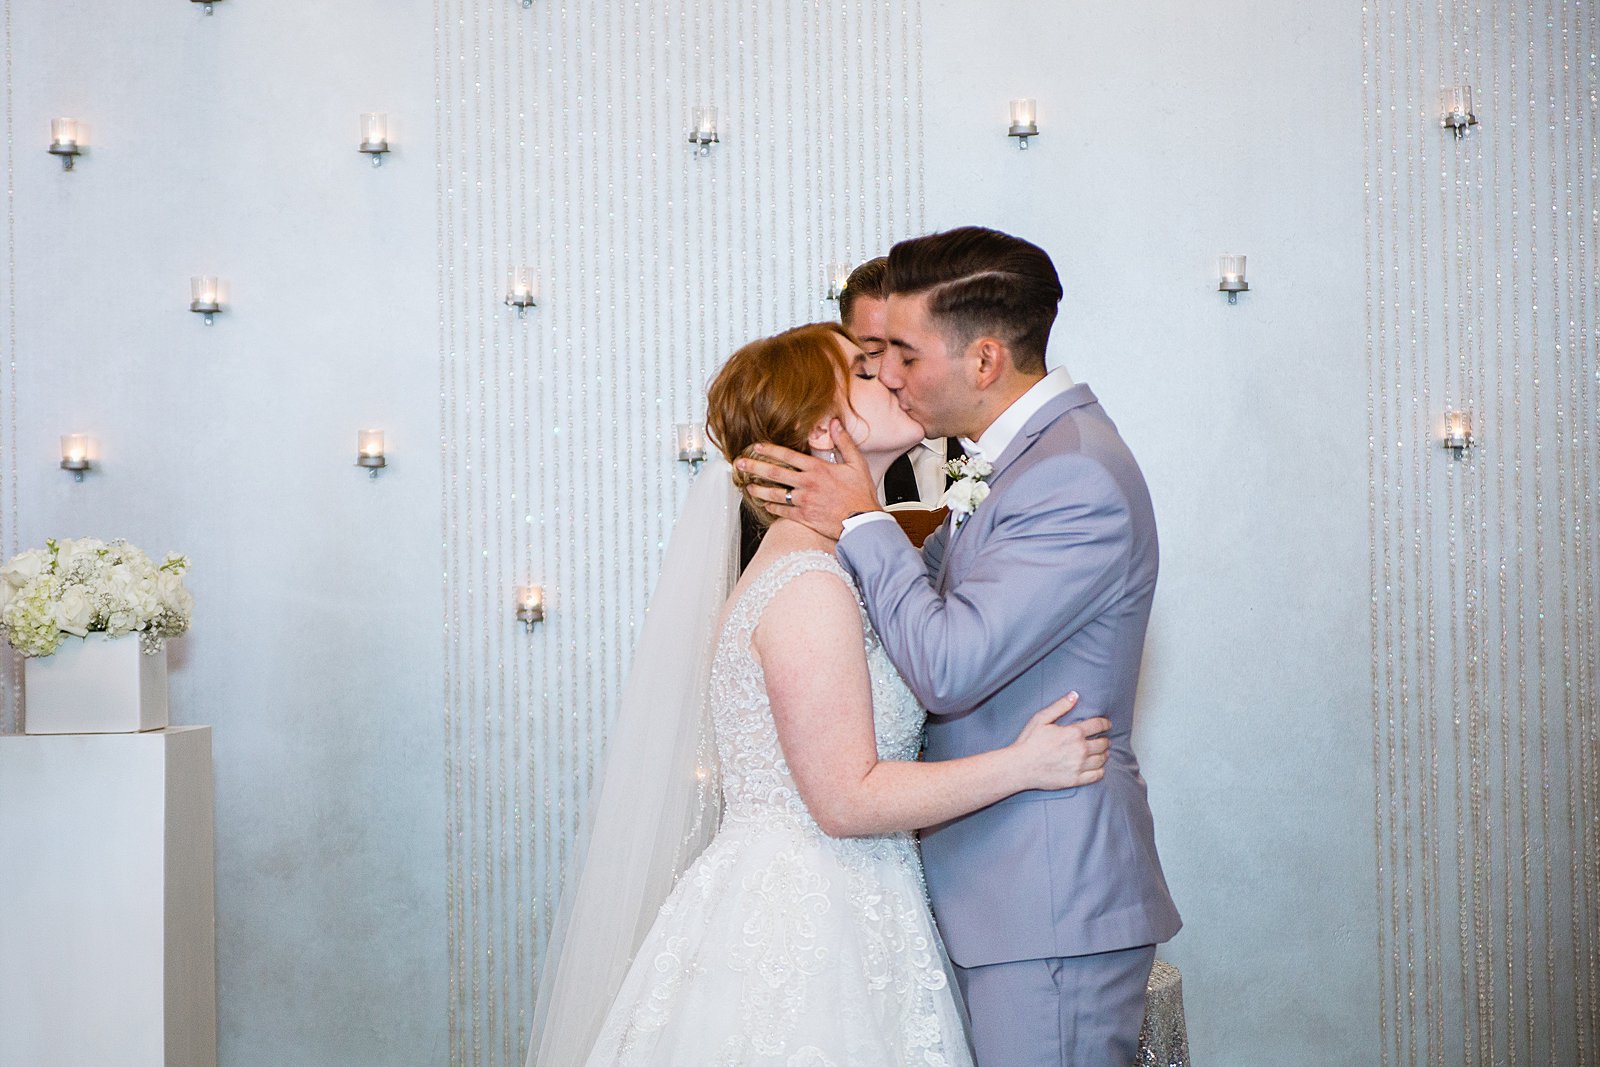 Bride and Groom share their first kiss during their wedding ceremony at SoHo63 by Arizona wedding photographer PMA Photography.